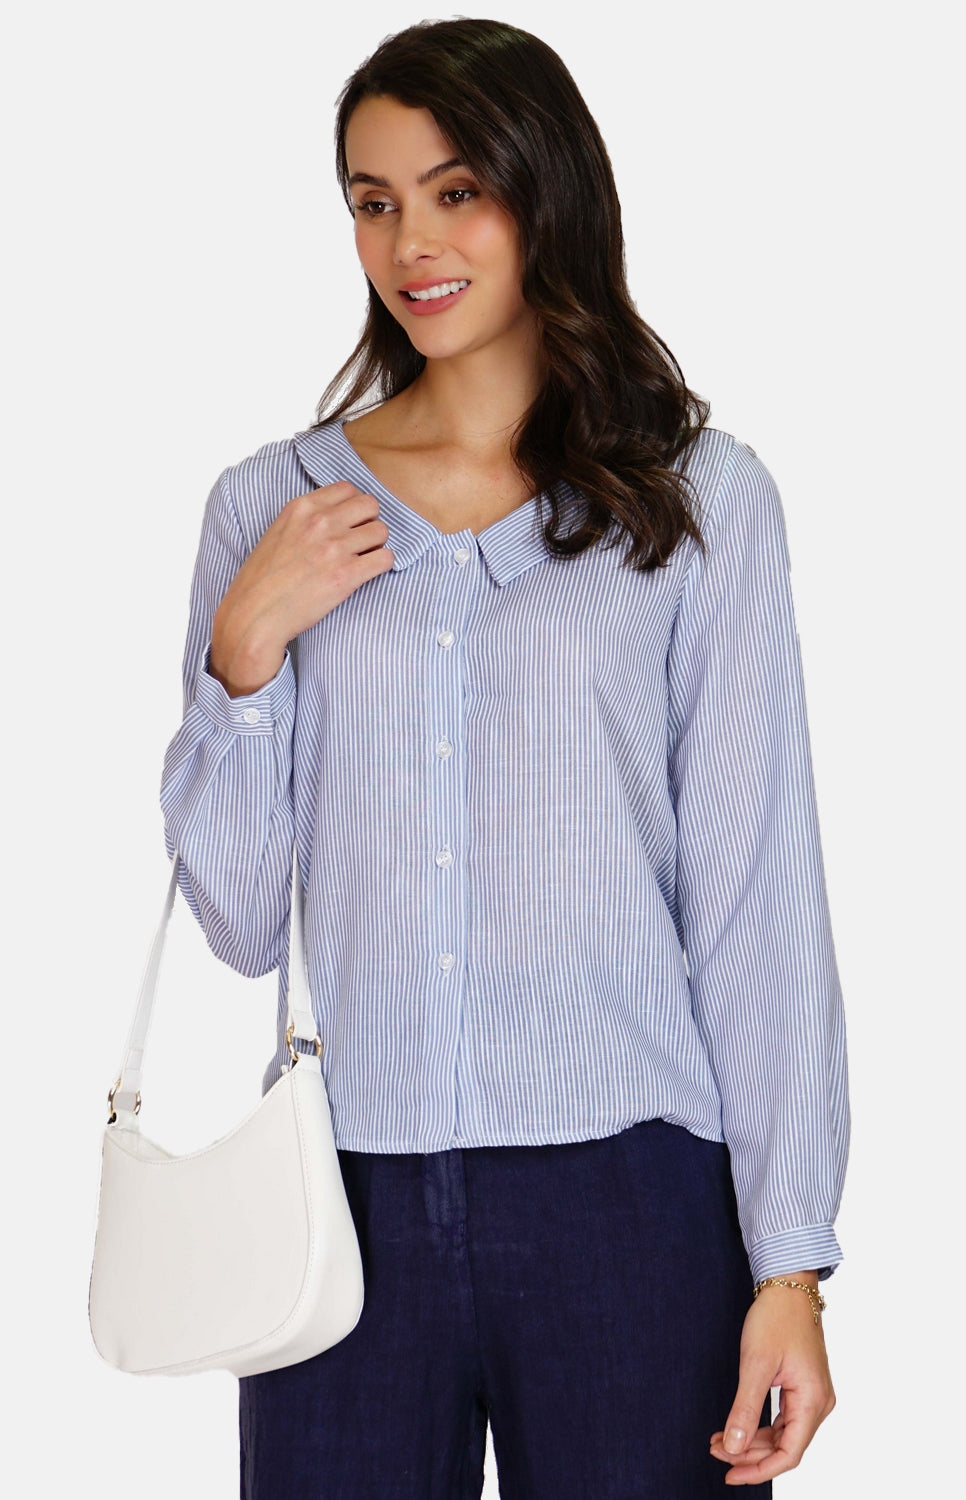 V-neck shirt in thin stripes buttoning in front